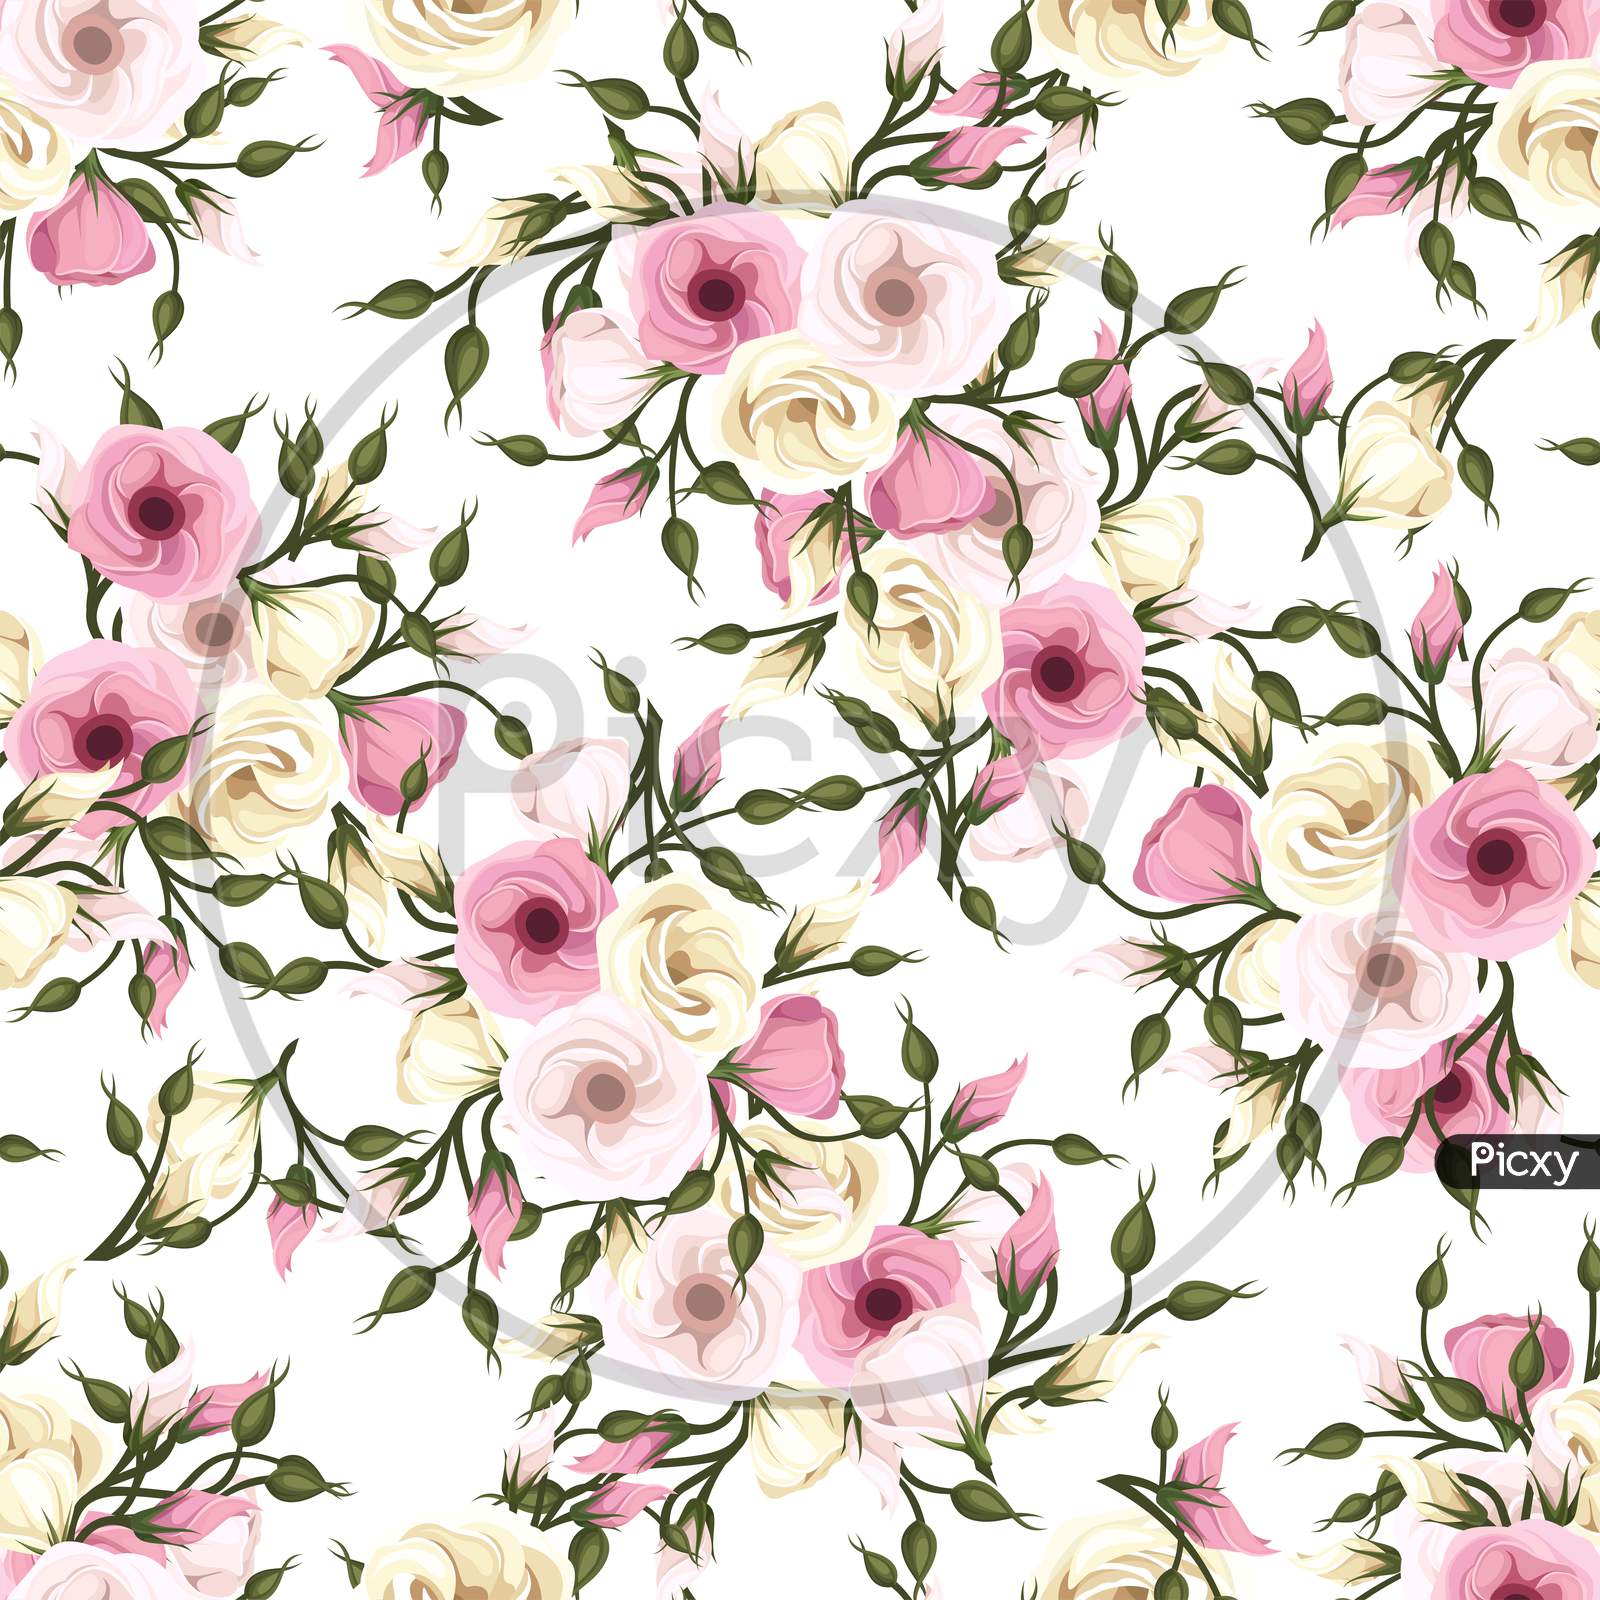 Pink And Yellow Flowers Seamless Pattern Illustration Wallpaper Design.